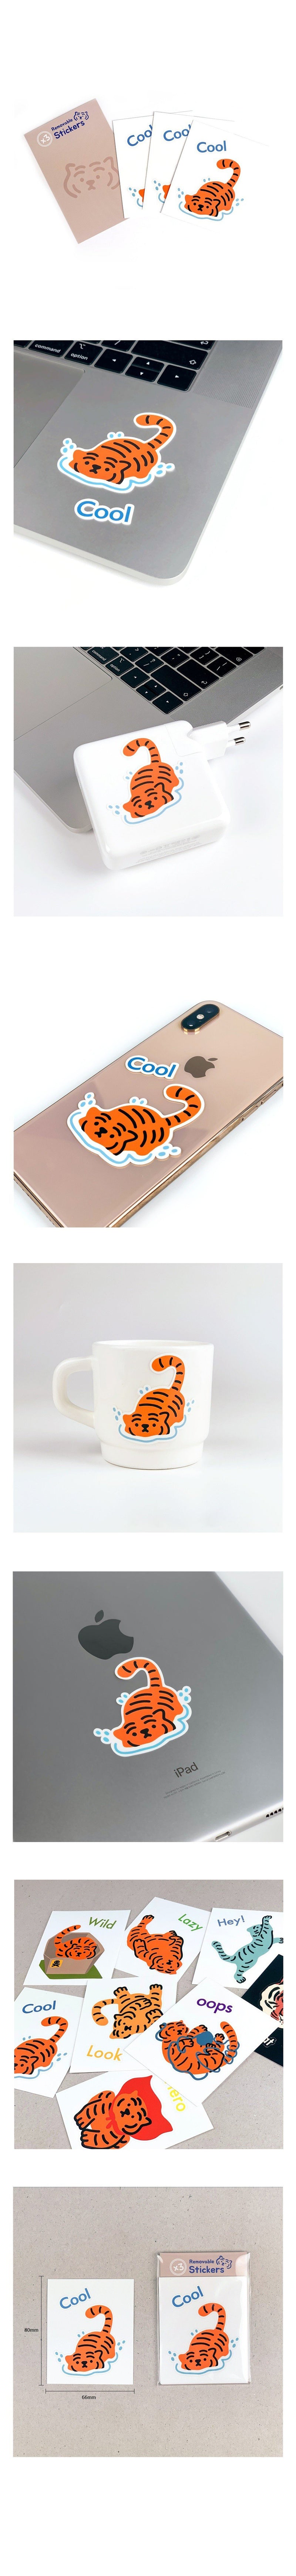 cool tiger removable sticker